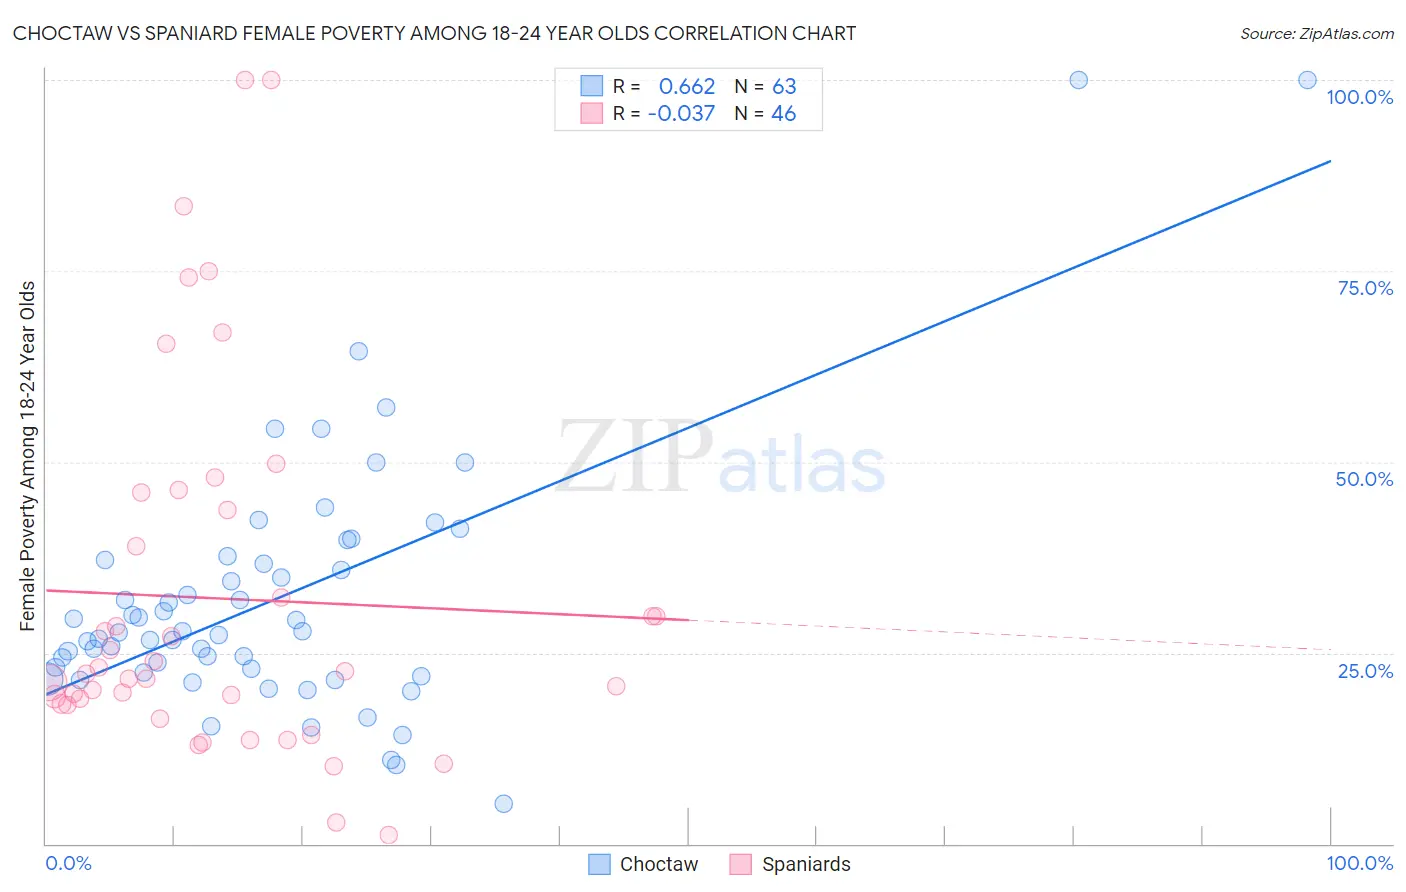 Choctaw vs Spaniard Female Poverty Among 18-24 Year Olds